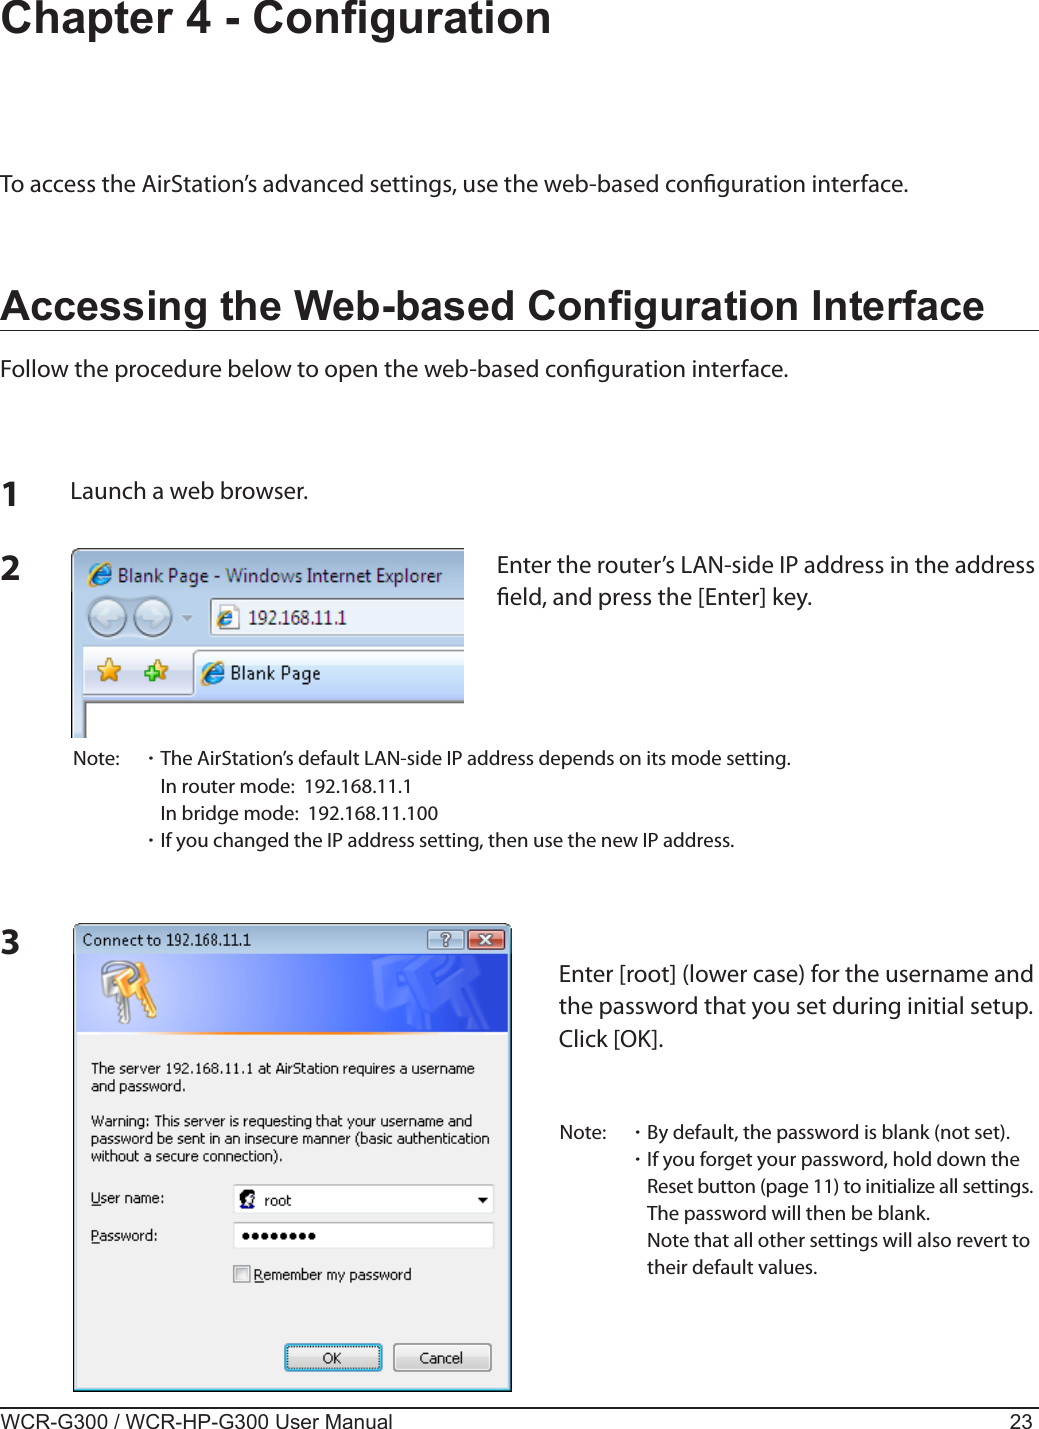 WCR-G300 / WCR-HP-G300 User Manual 23Chapter 4 - CongurationTo access the AirStation’s advanced settings, use the web-based conguration interface.Accessing the Web-based Conguration InterfaceFollow the procedure below to open the web-based conguration interface.123Launch a web browser.Enter the router’s LAN-side IP address in the address eld, and press the [Enter] key.Note:  ･ The AirStation’s default LAN-side IP address depends on its mode setting.    In router mode:  192.168.11.1    In bridge mode:  192.168.11.100 ･ If you changed the IP address setting, then use the new IP address.Enter [root] (lower case) for the username and the password that you set during initial setup.  Click [OK].Note:  ･ By default, the password is blank (not set). ･ If you forget your password, hold down the Reset button (page 11) to initialize all settings. The password will then be blank.    Note that all other settings will also revert to their default values.